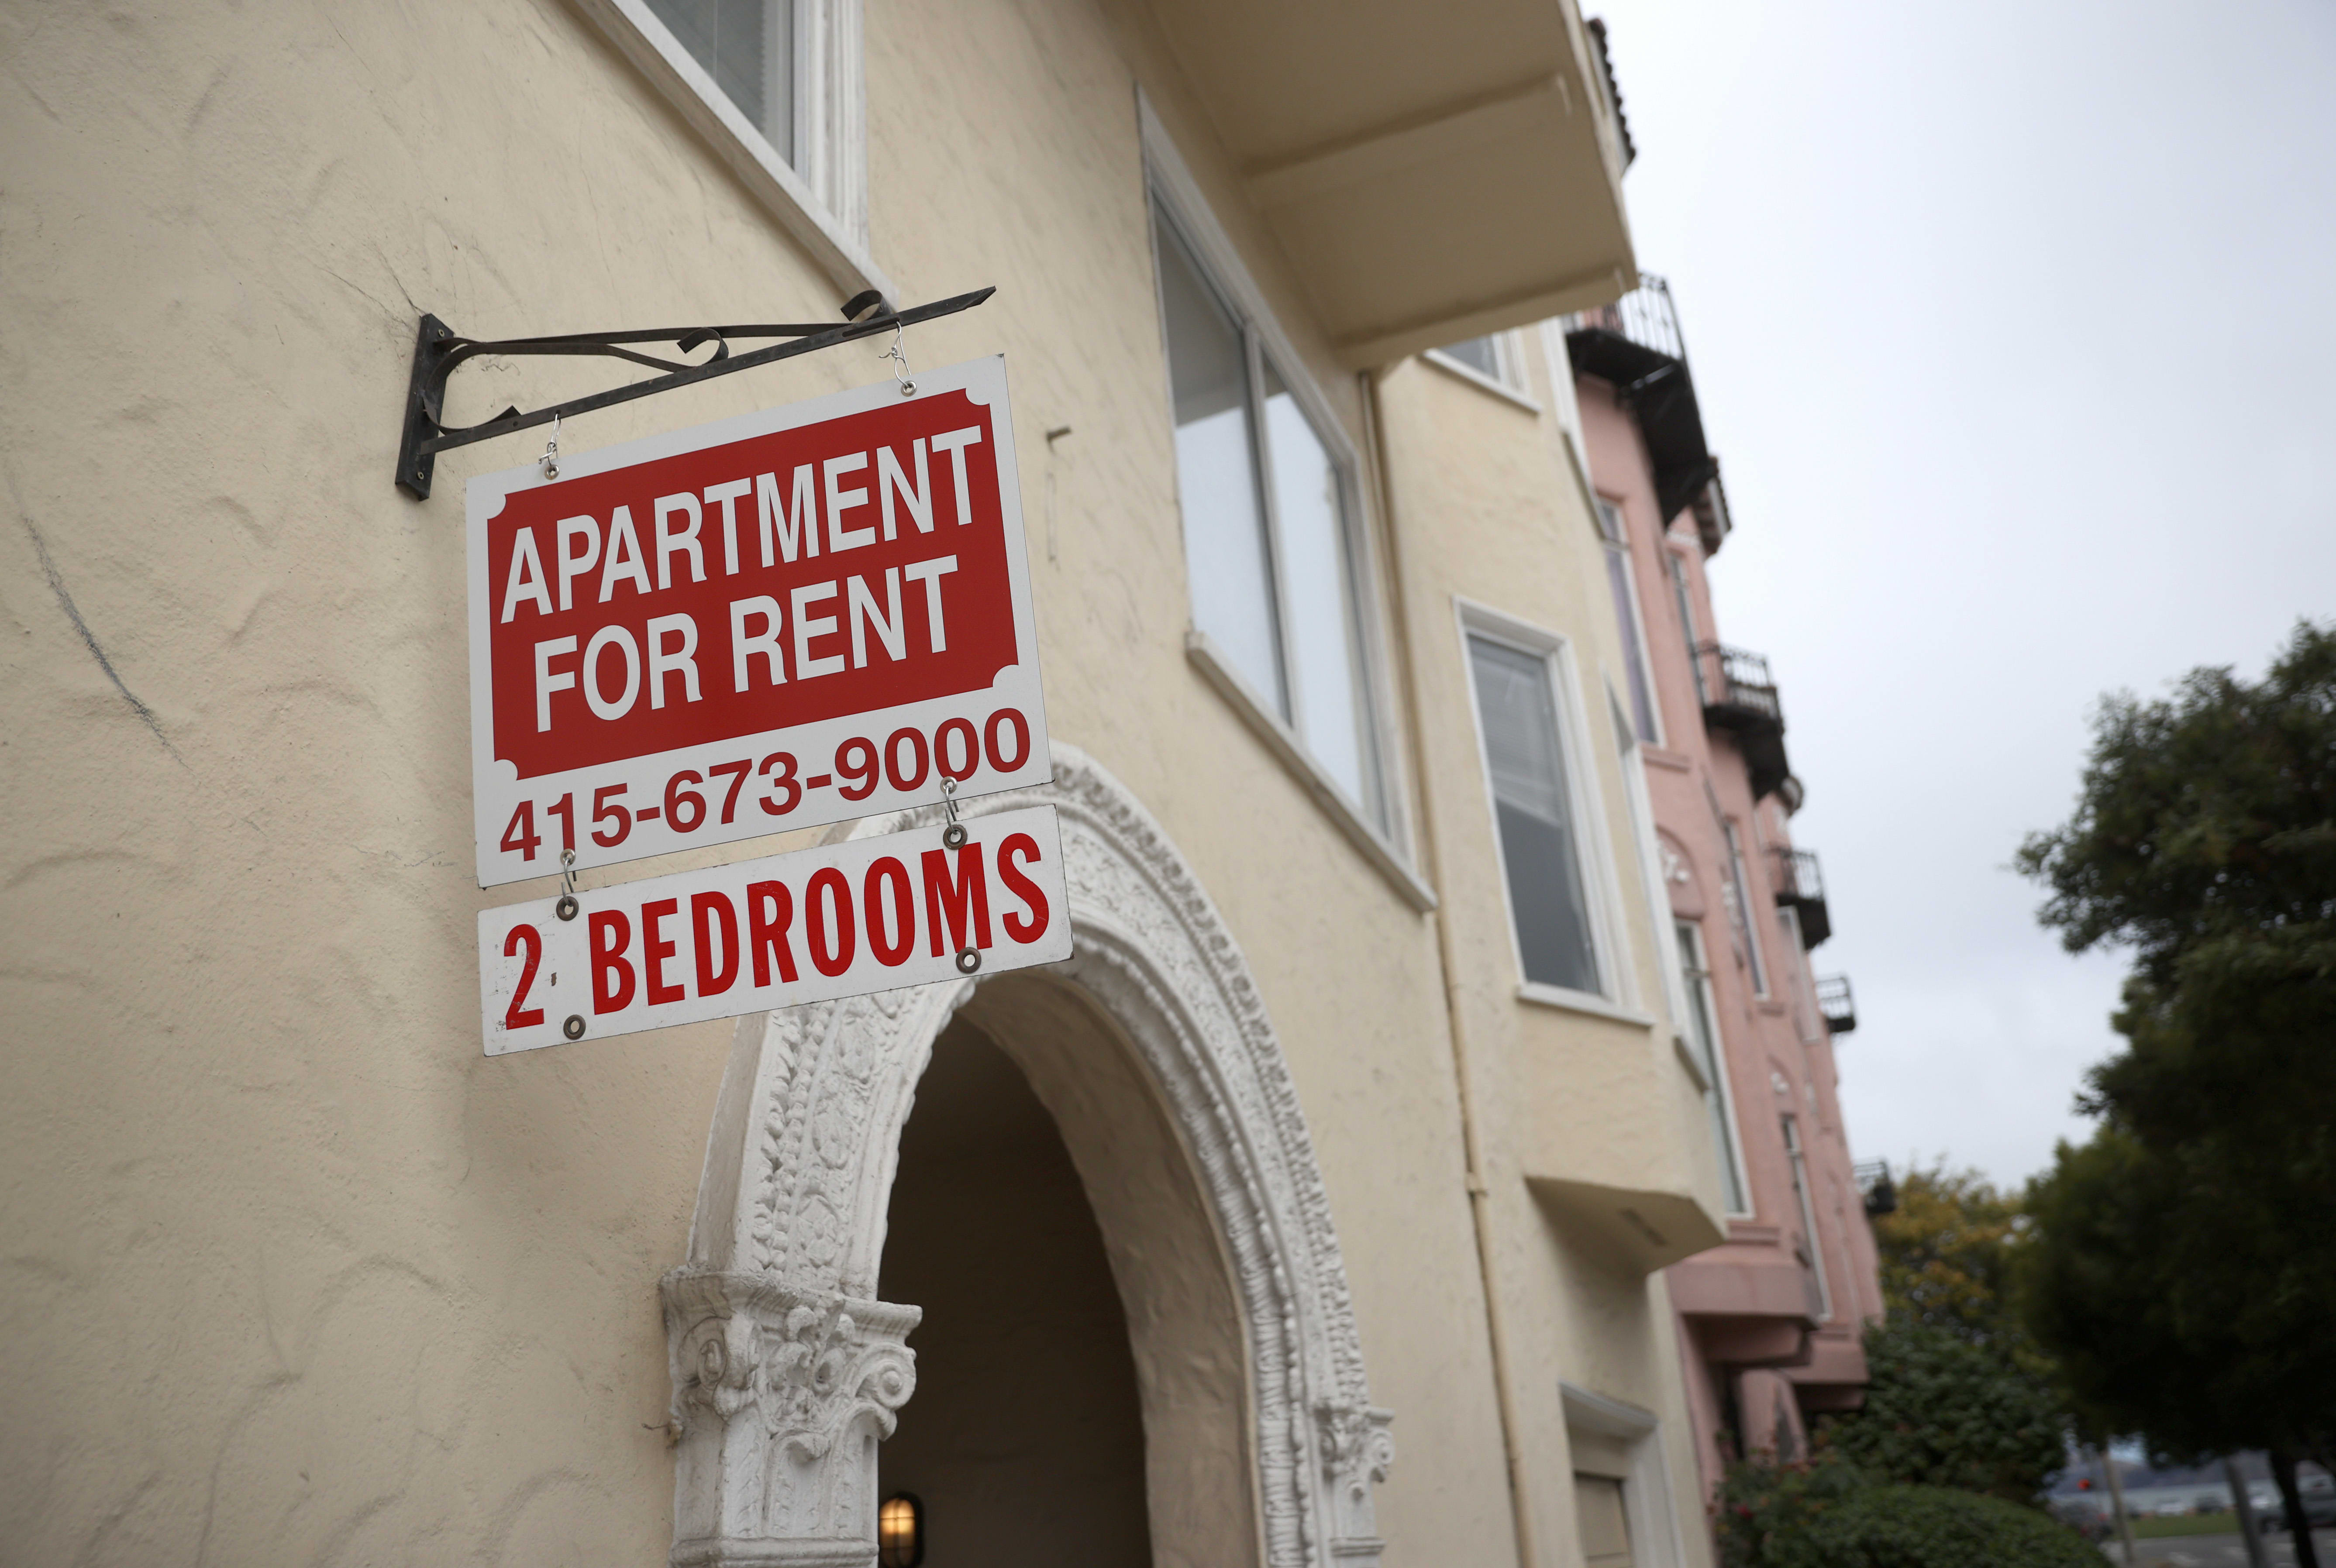 Apartment rent and occupancy hit record highs, even as market enters its traditi..